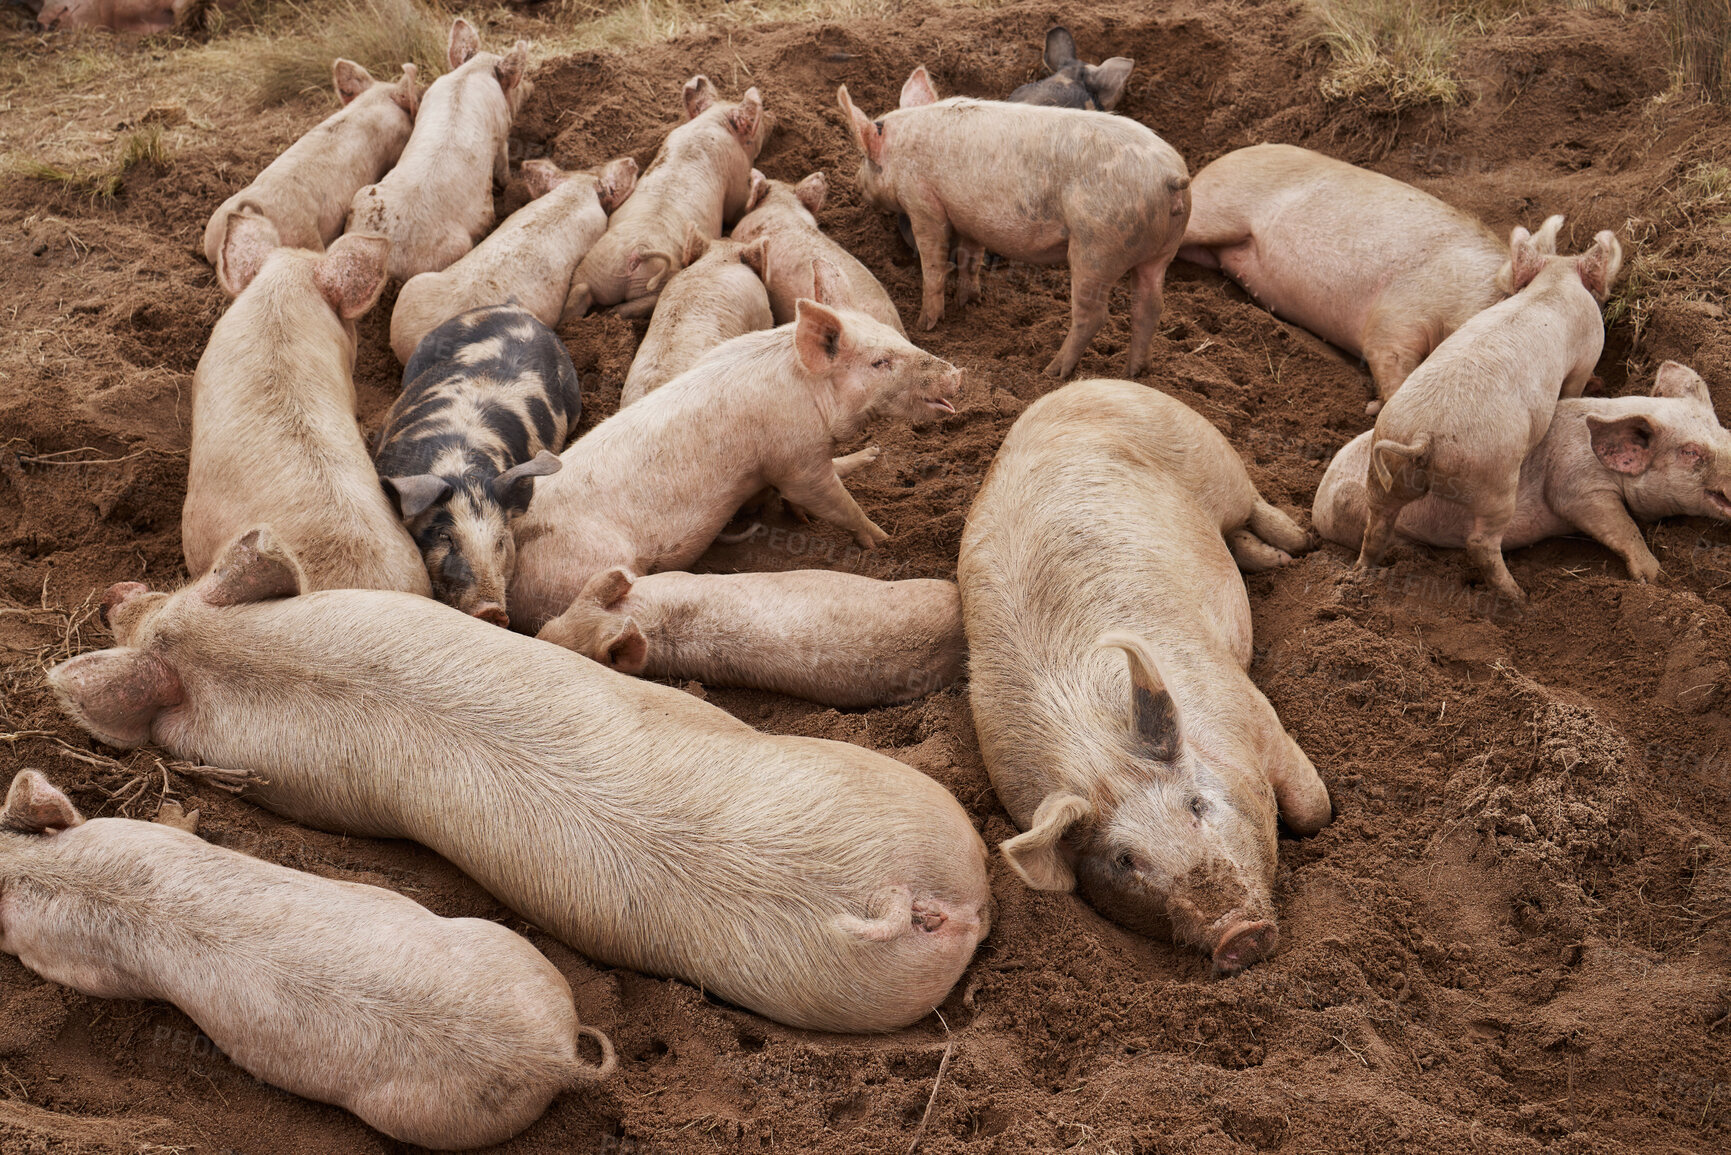 Buy stock photo Shot of pigs lying in the mud on a farm